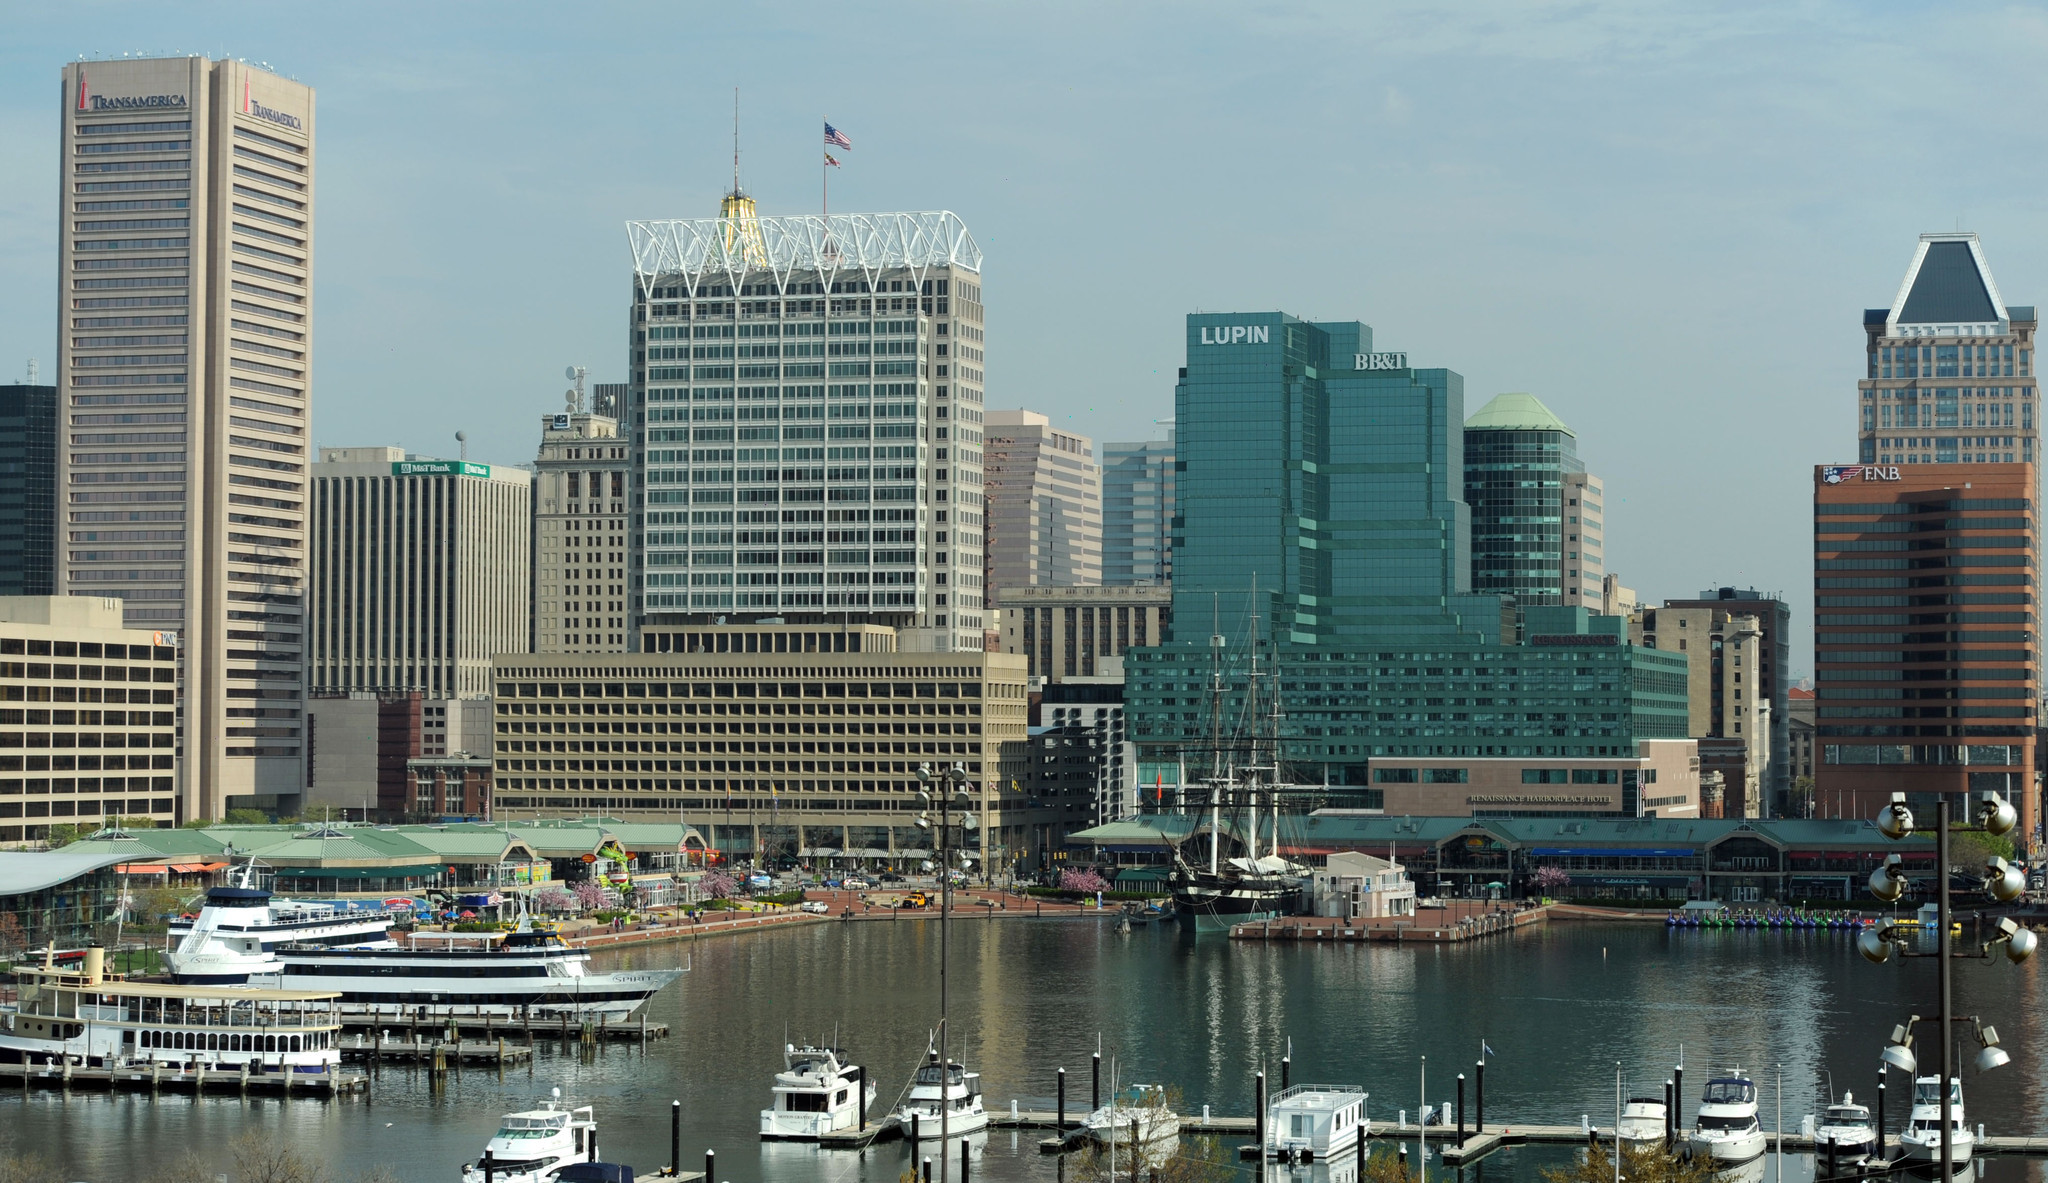 Baltimore's skyline through the years [Pictures] - Baltimore Sun